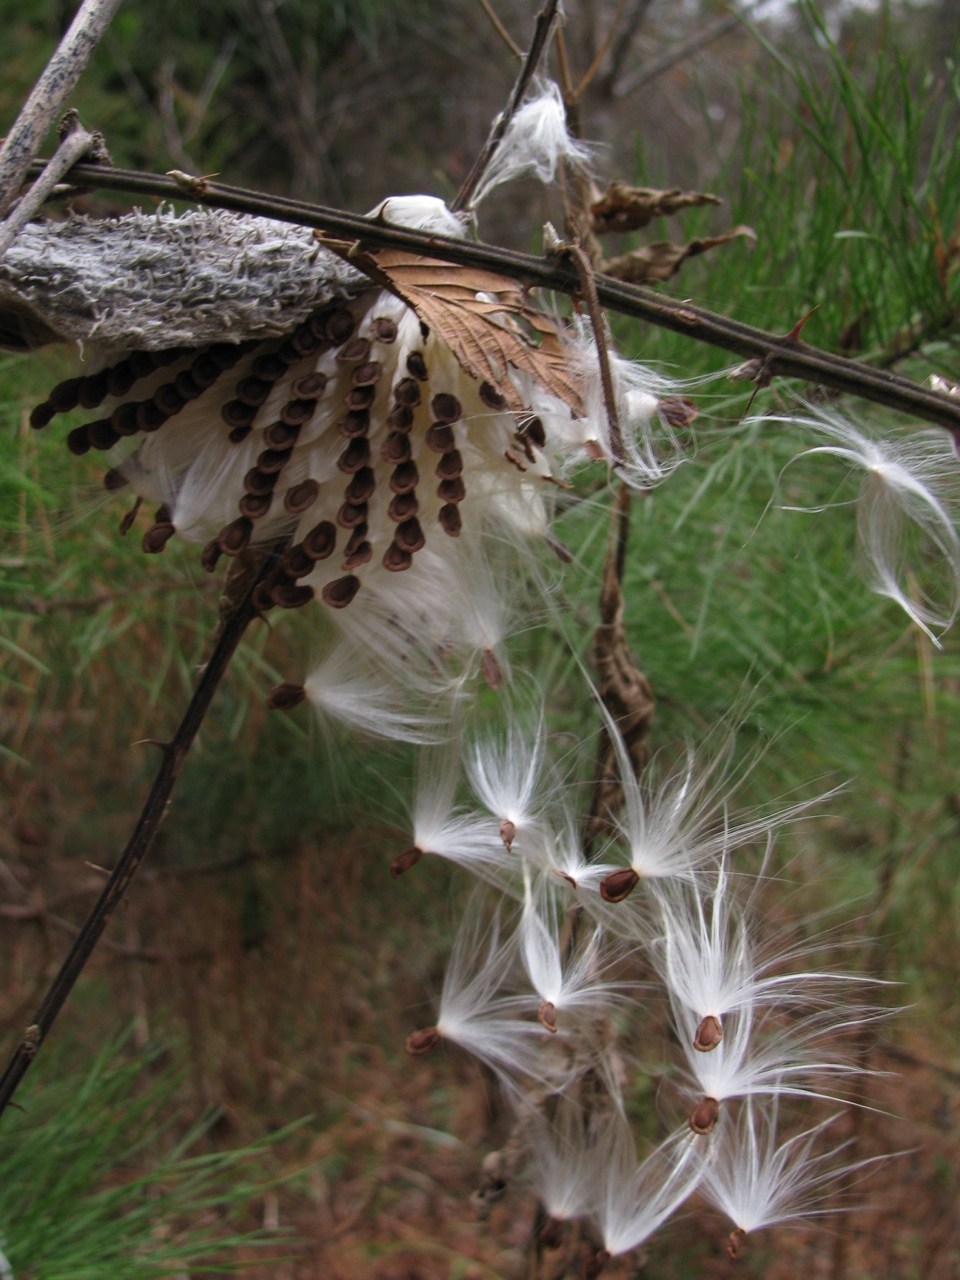 The Scientific Name is Asclepias syriaca. You will likely hear them called Common Milkweed. This picture shows the Seeds releasing from mature fruit (follicle). of Asclepias syriaca